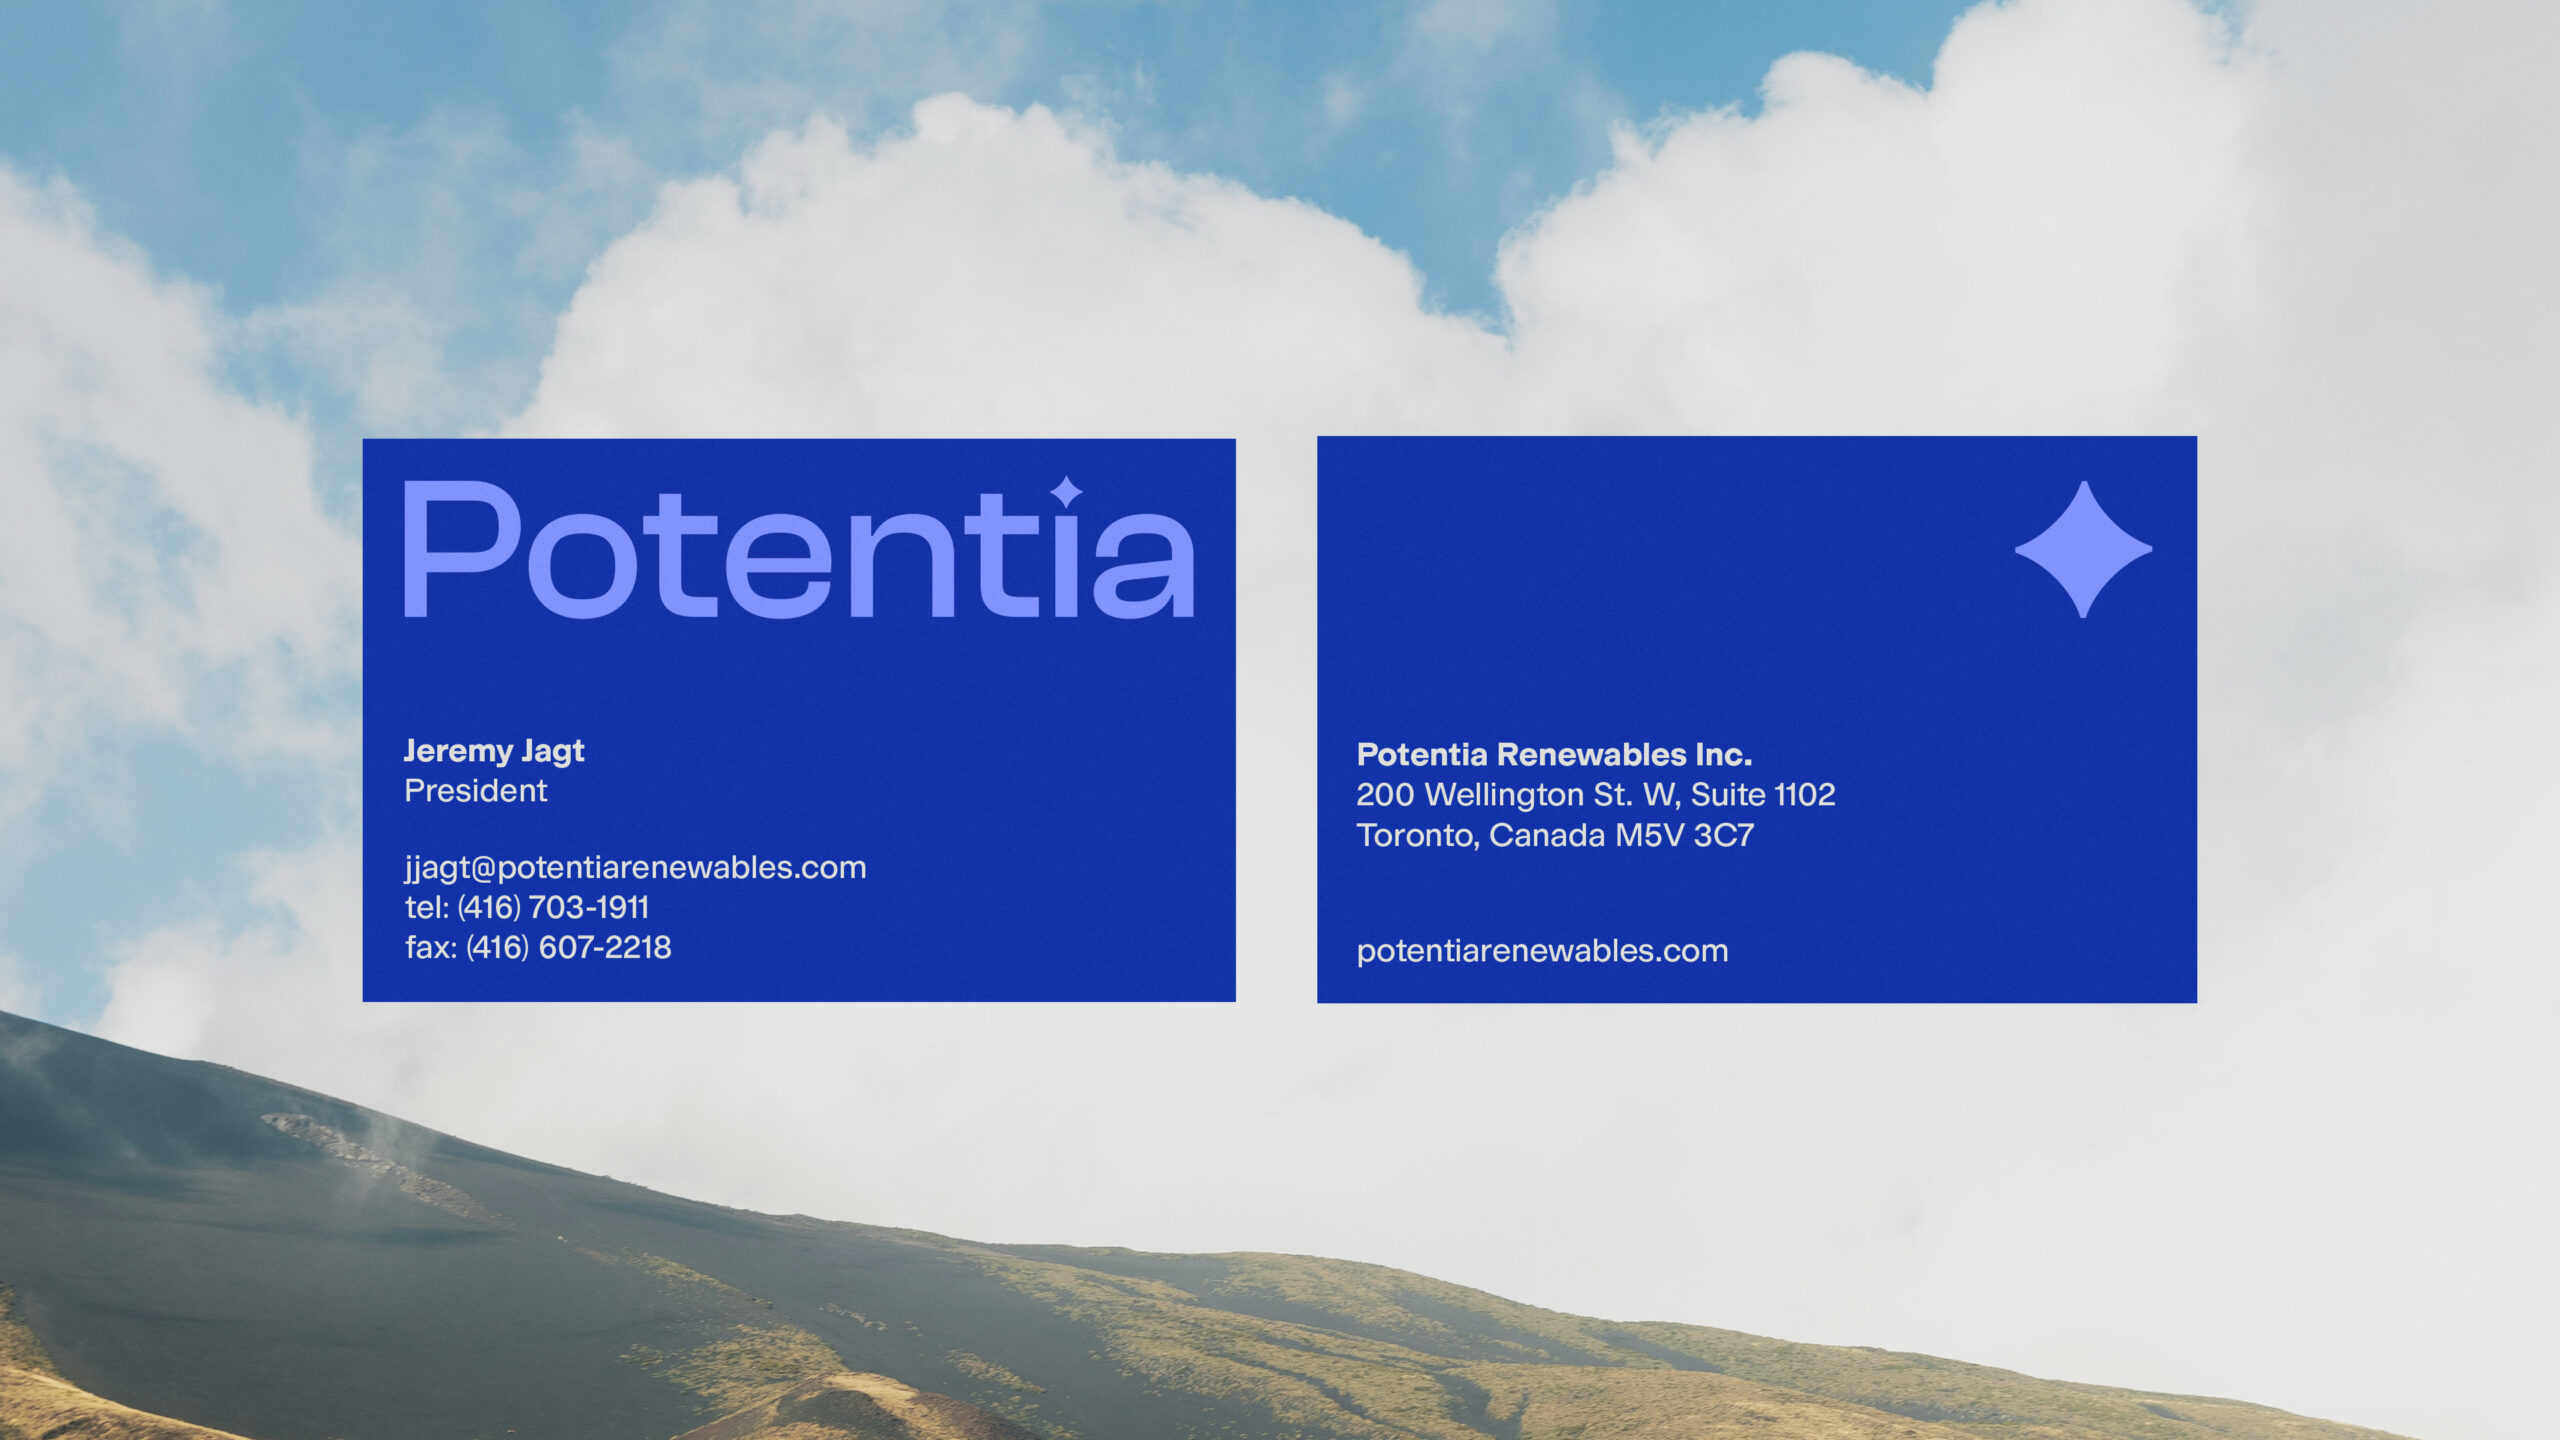 Potentia Renewables: Creating the new green normal